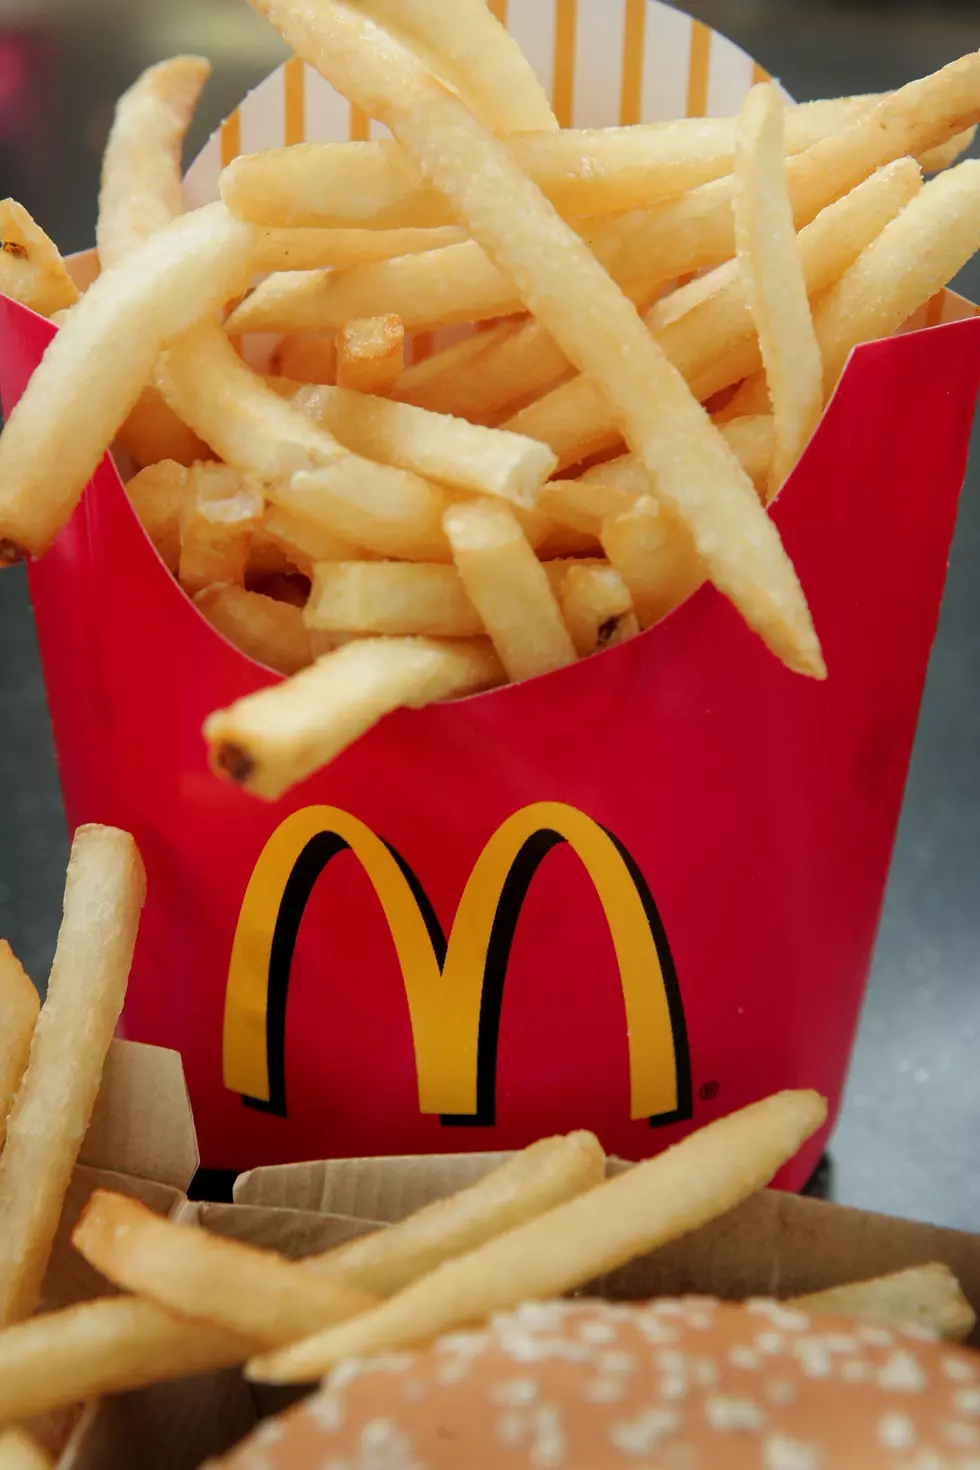 The Cure For Baldness Might Have Been Discovered in McDonald&#8217;s French Fries